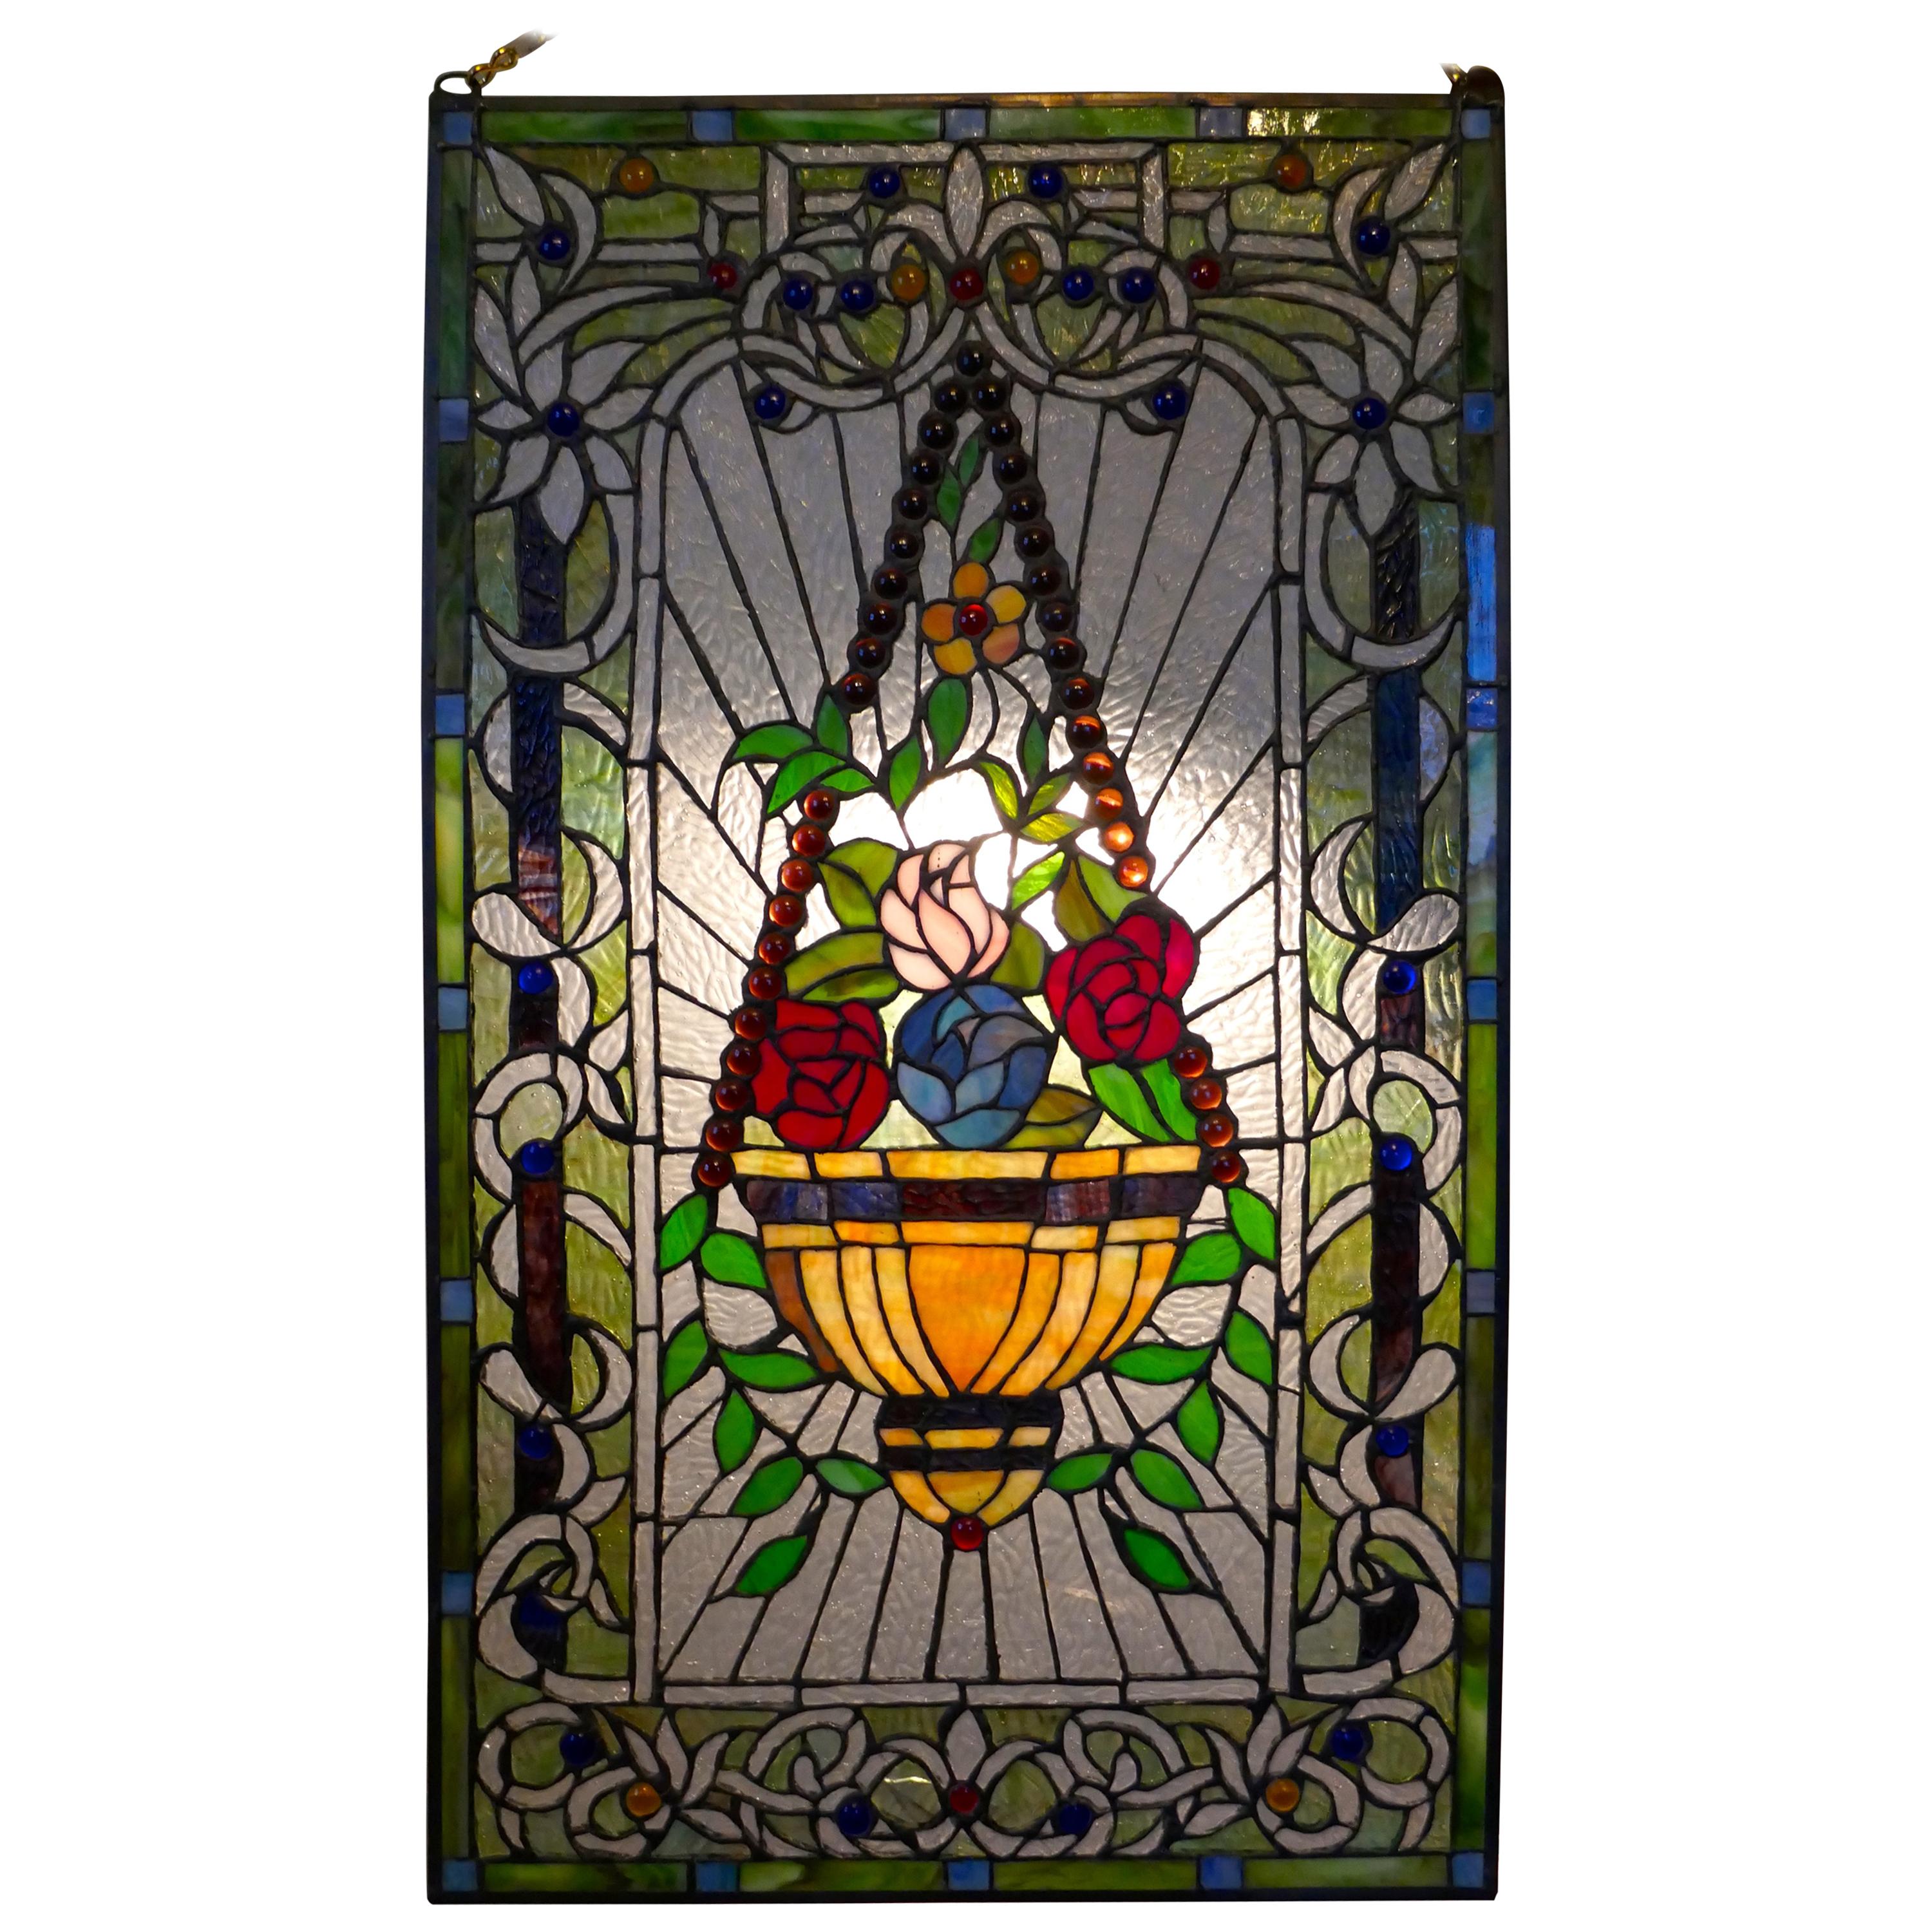 Large Art Nouveau Stained Glass Panel for a Window or Door